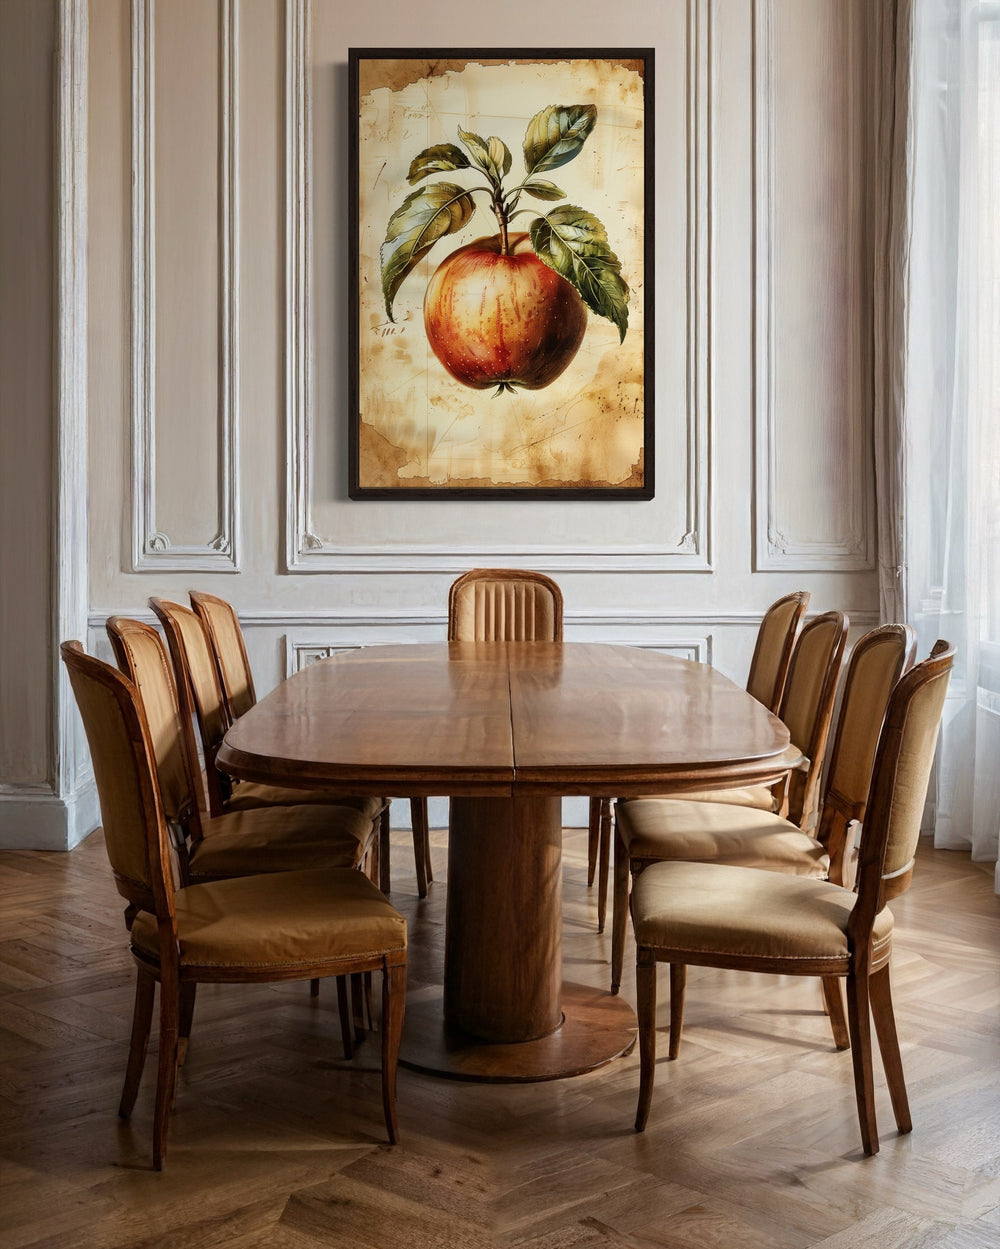 Vintage Apple Painting Framed Canvas Wall Art For Kitchen